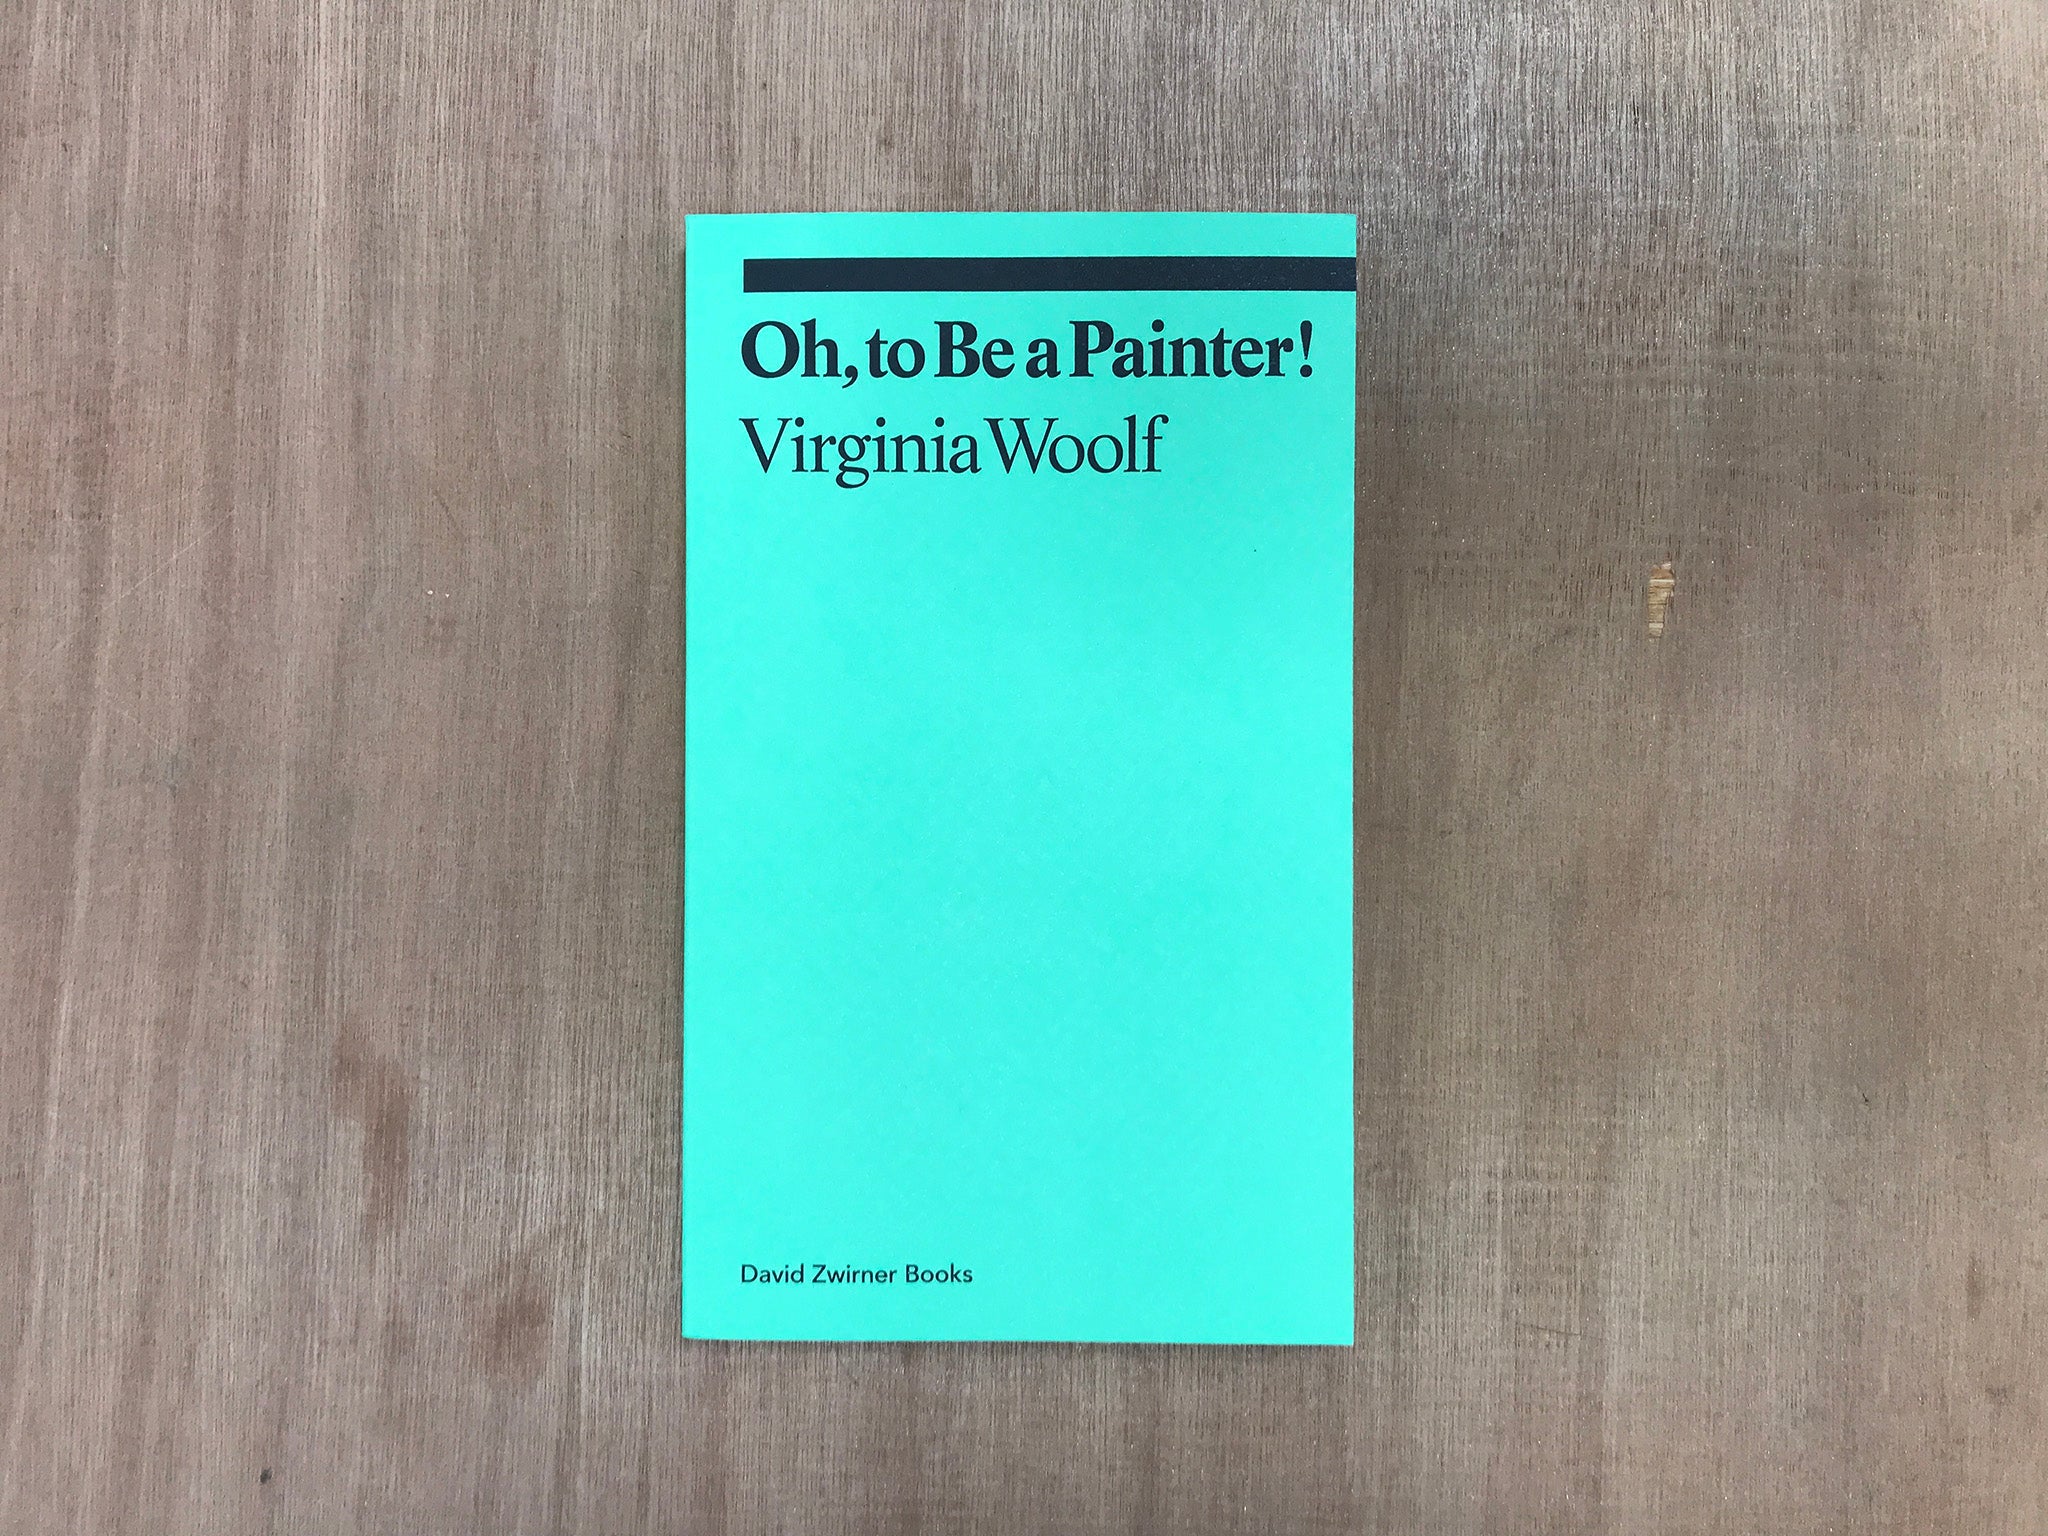 OH, TO BE A PAINTER! by Virginia Woolf